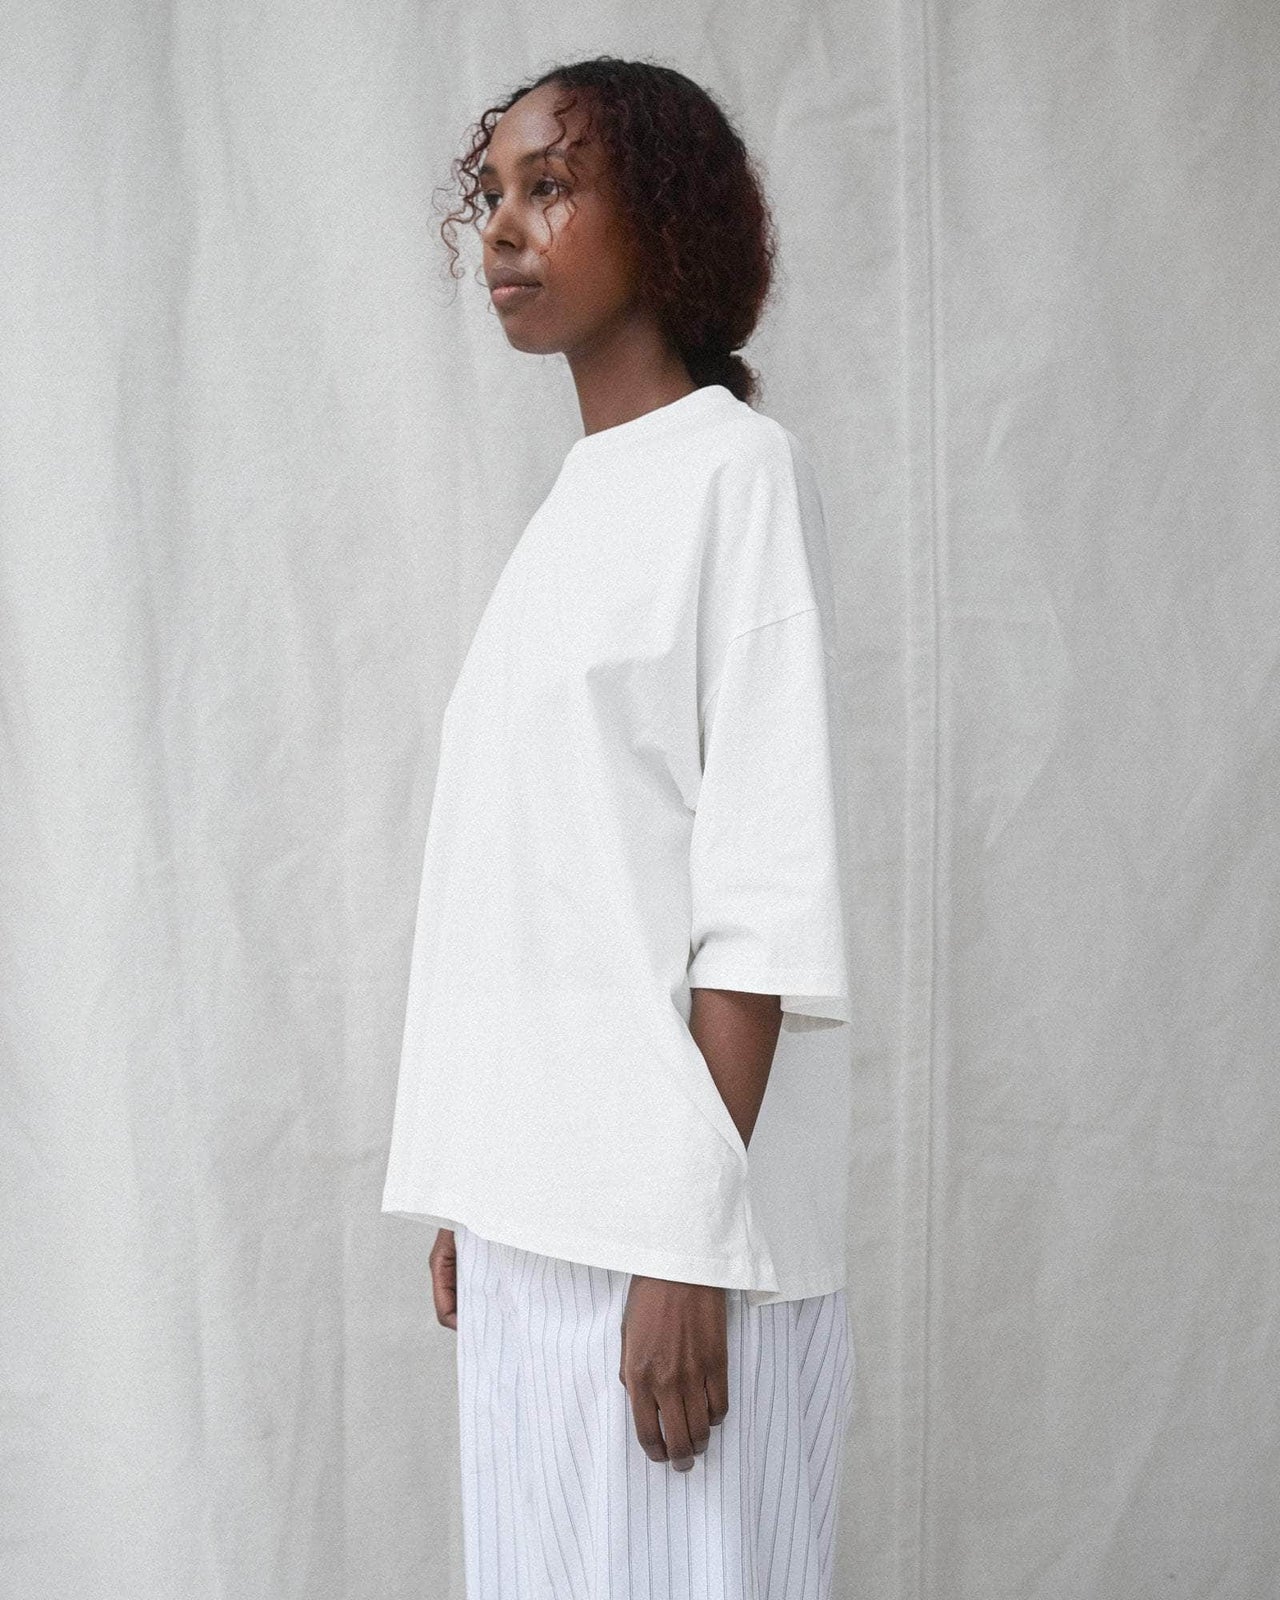 Tees | Basics in Natural and Recycled Fibers | バセランジュ